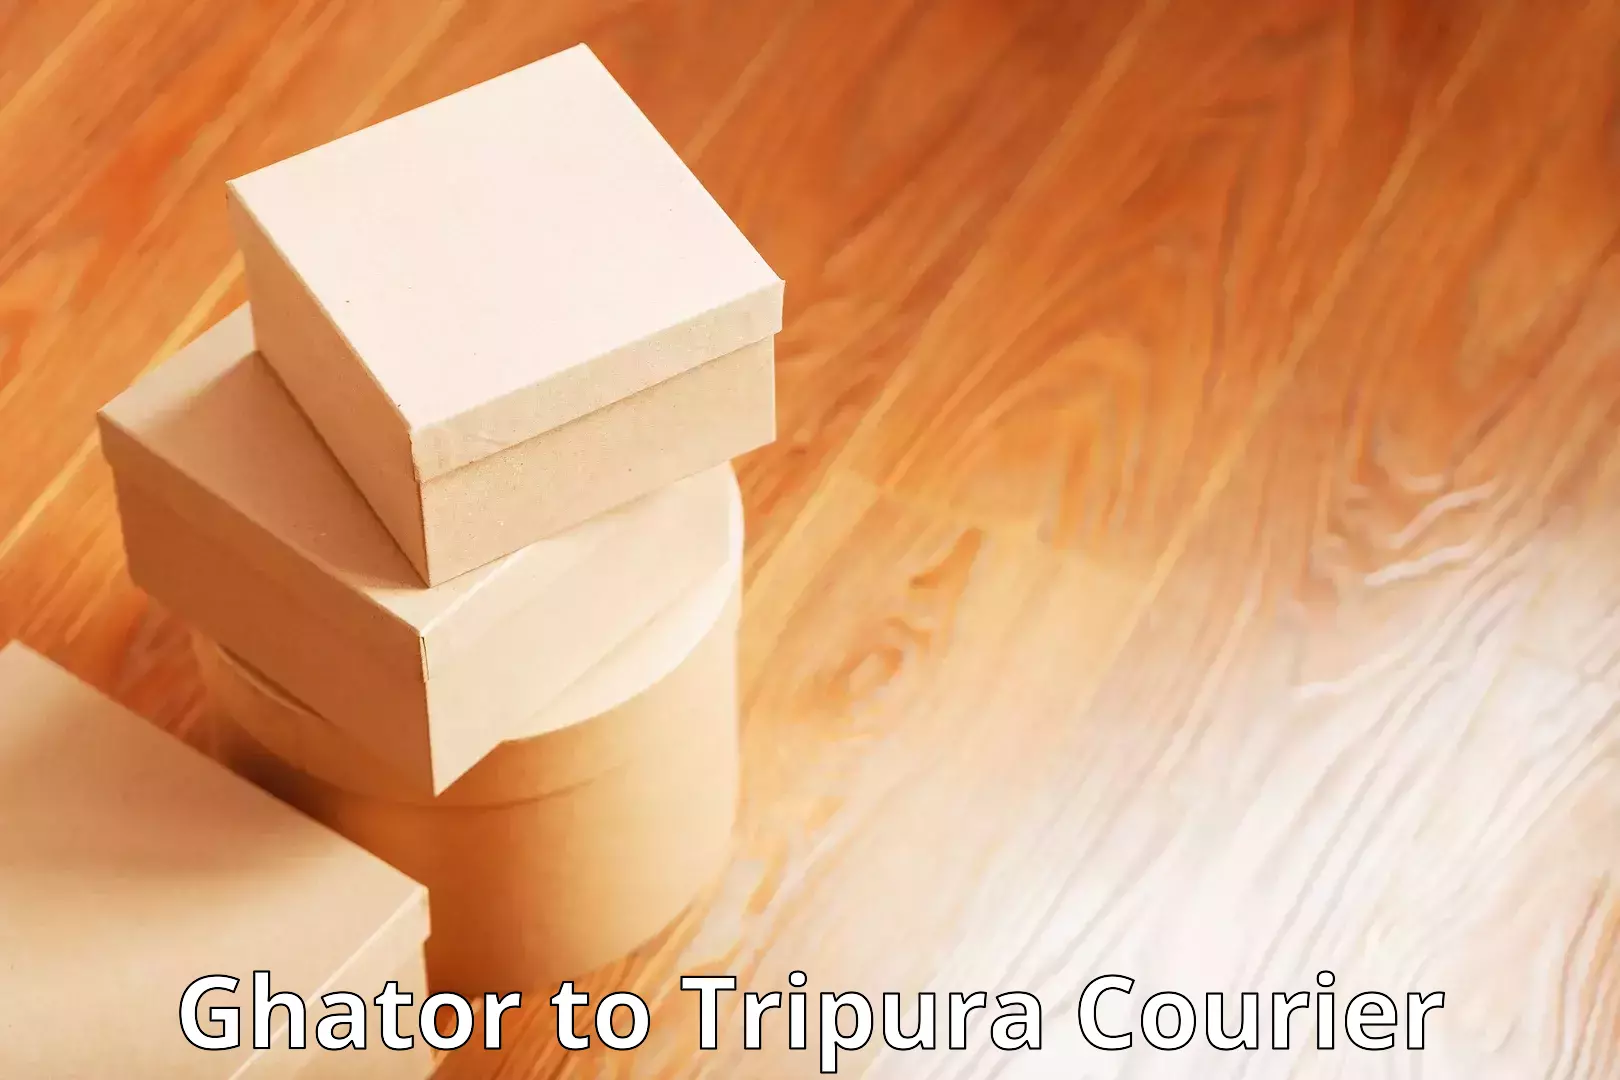 Multi-package shipping Ghator to Udaipur Tripura